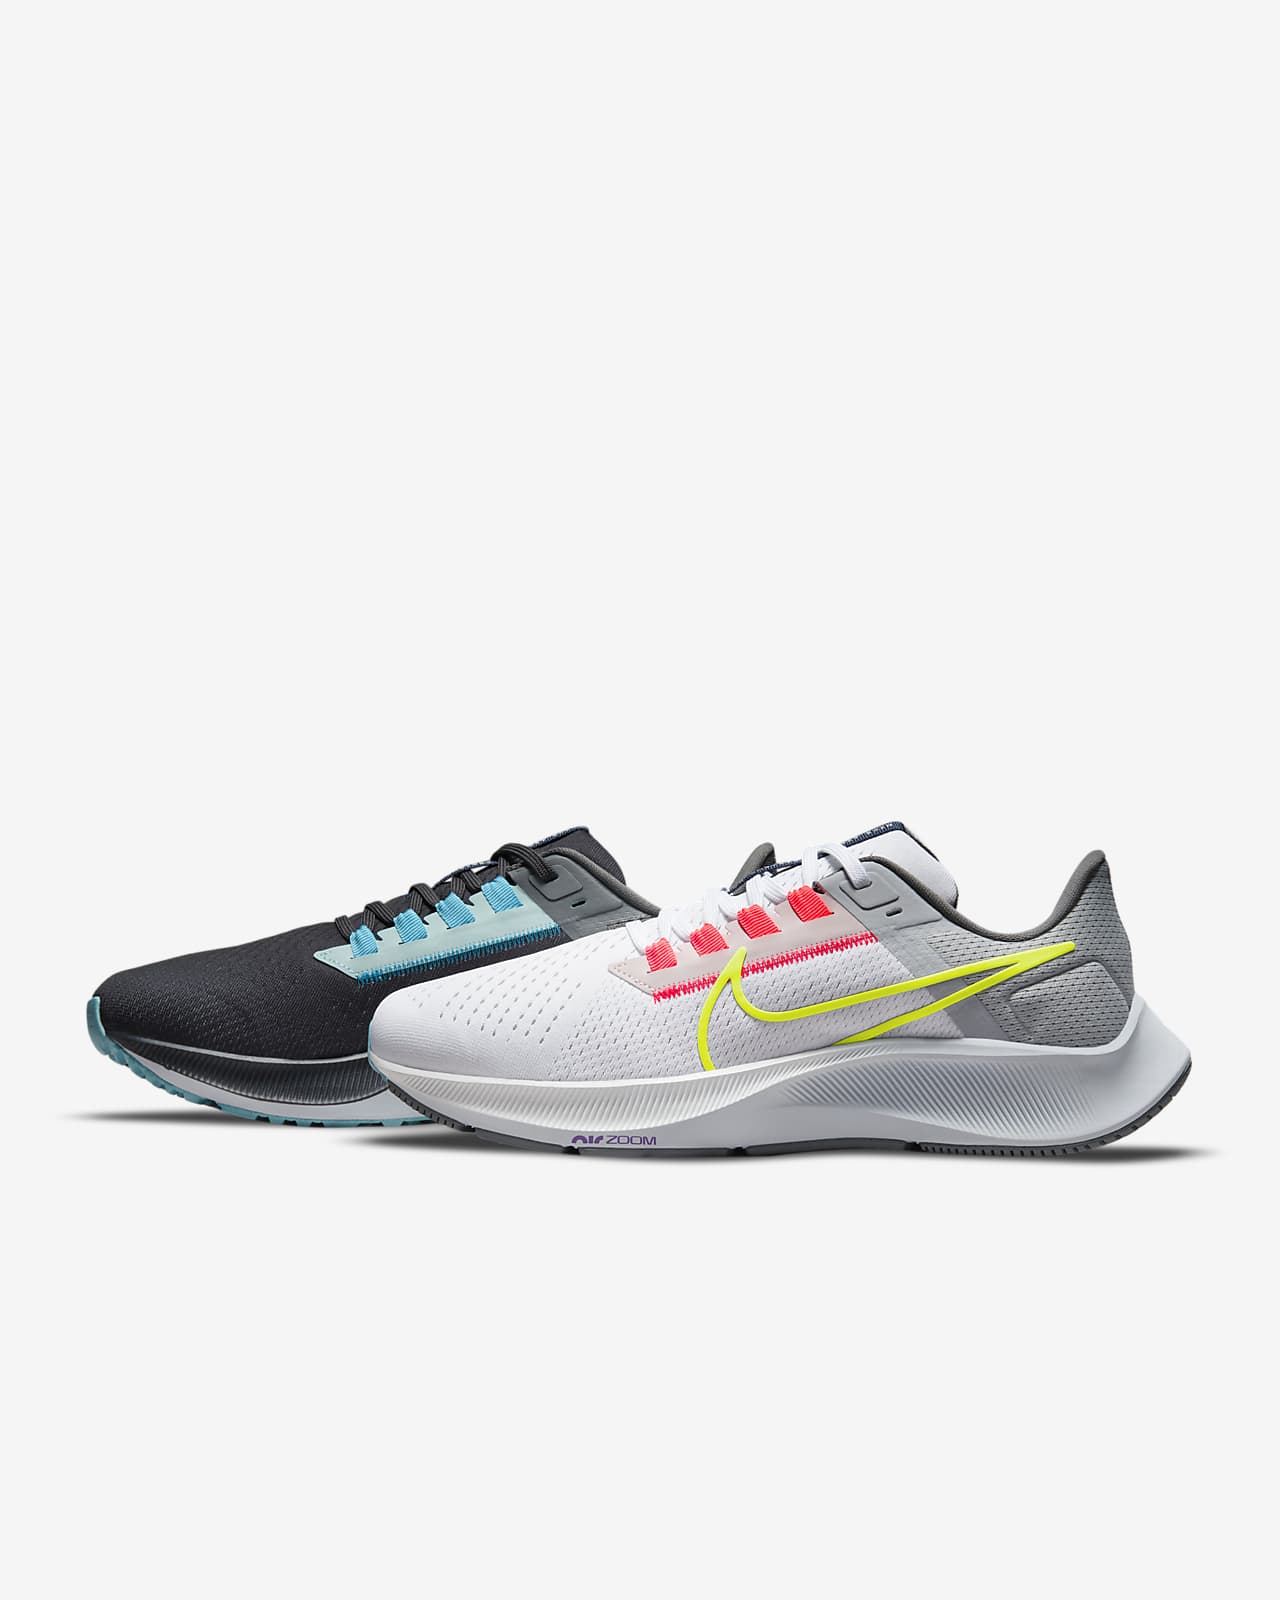 Chaussure de running Nike Air Zoom Pegasus 38 Limited Edition pour Femme